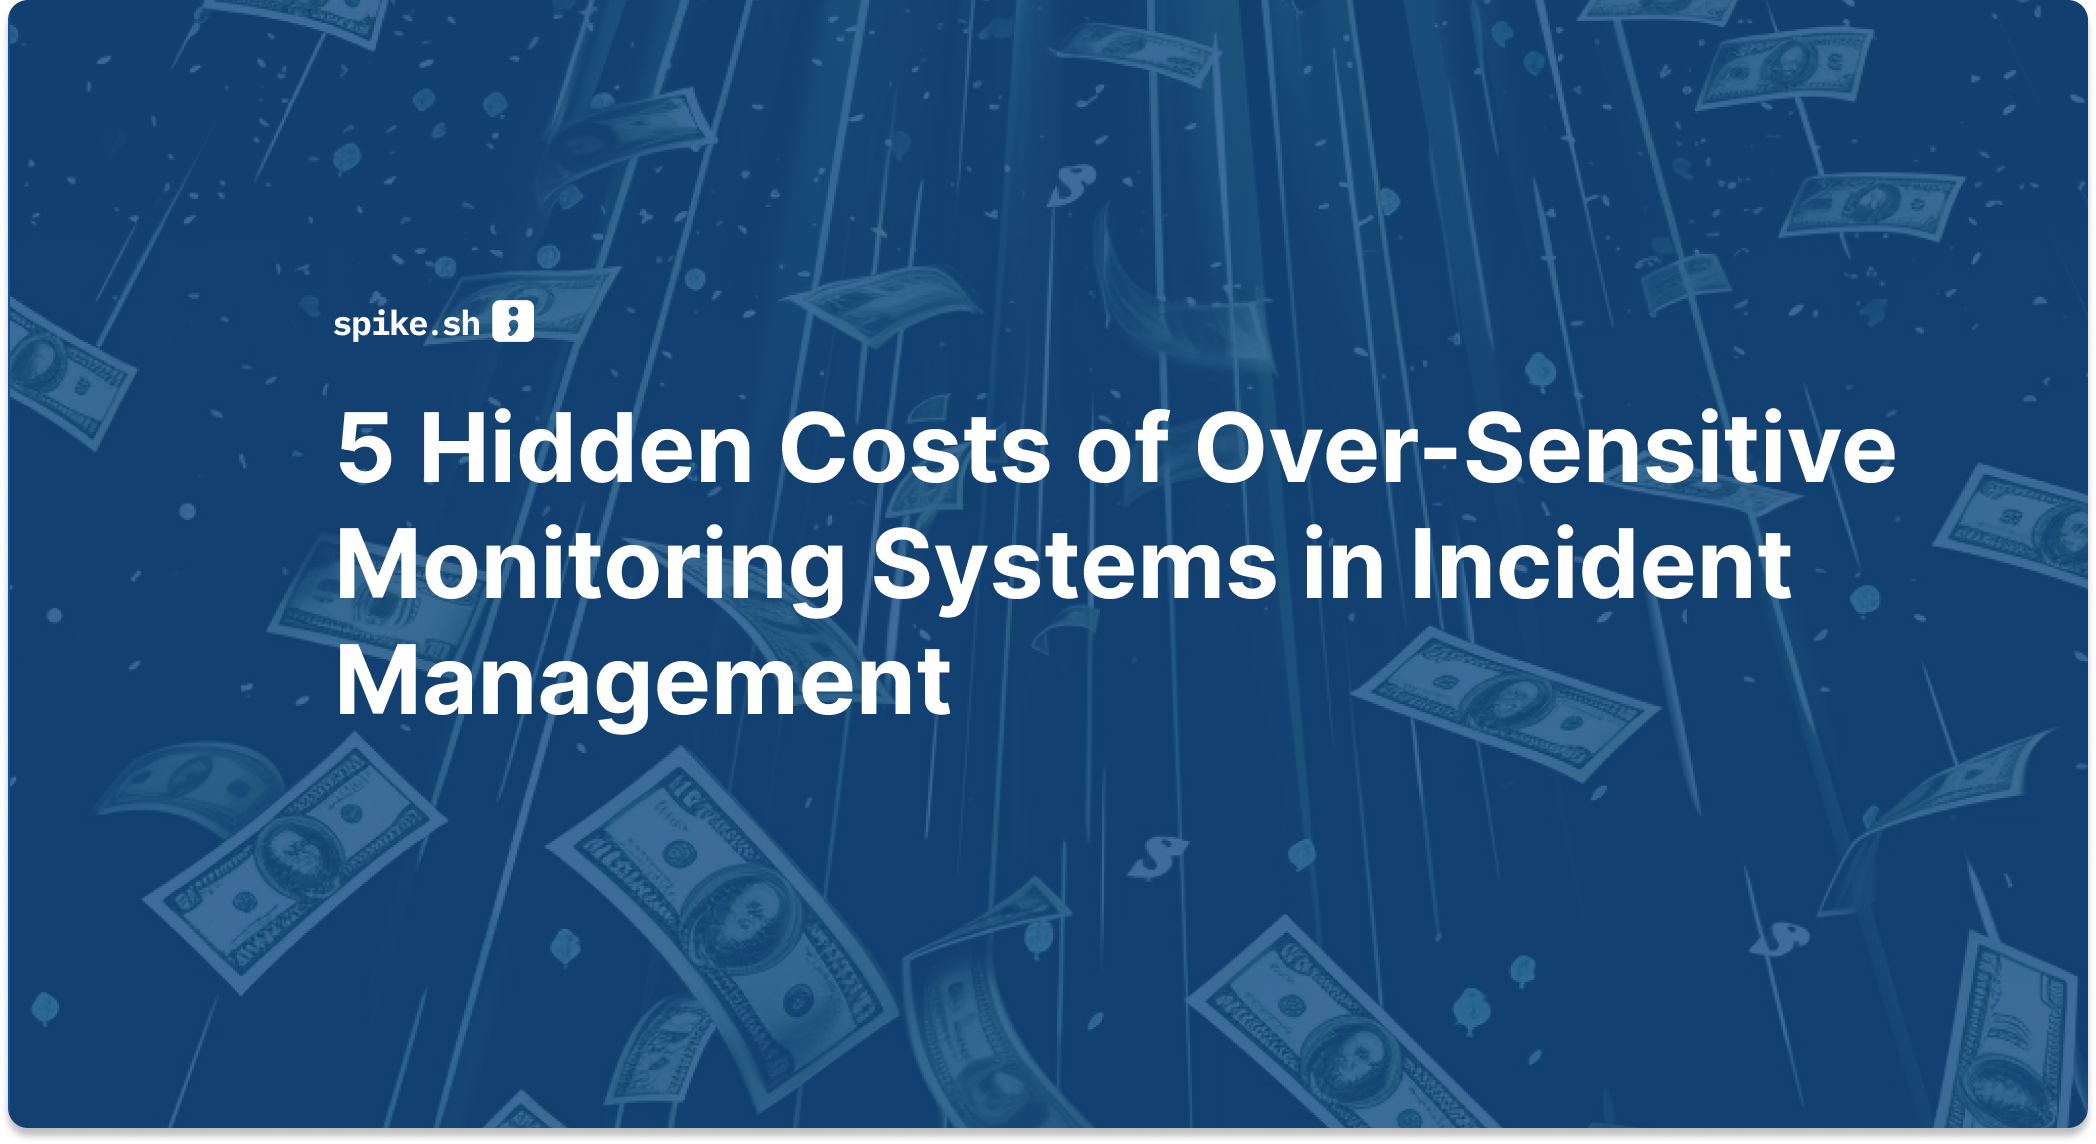 5 Hidden Costs of Over-Sensitive Monitoring Systems in Incident Management